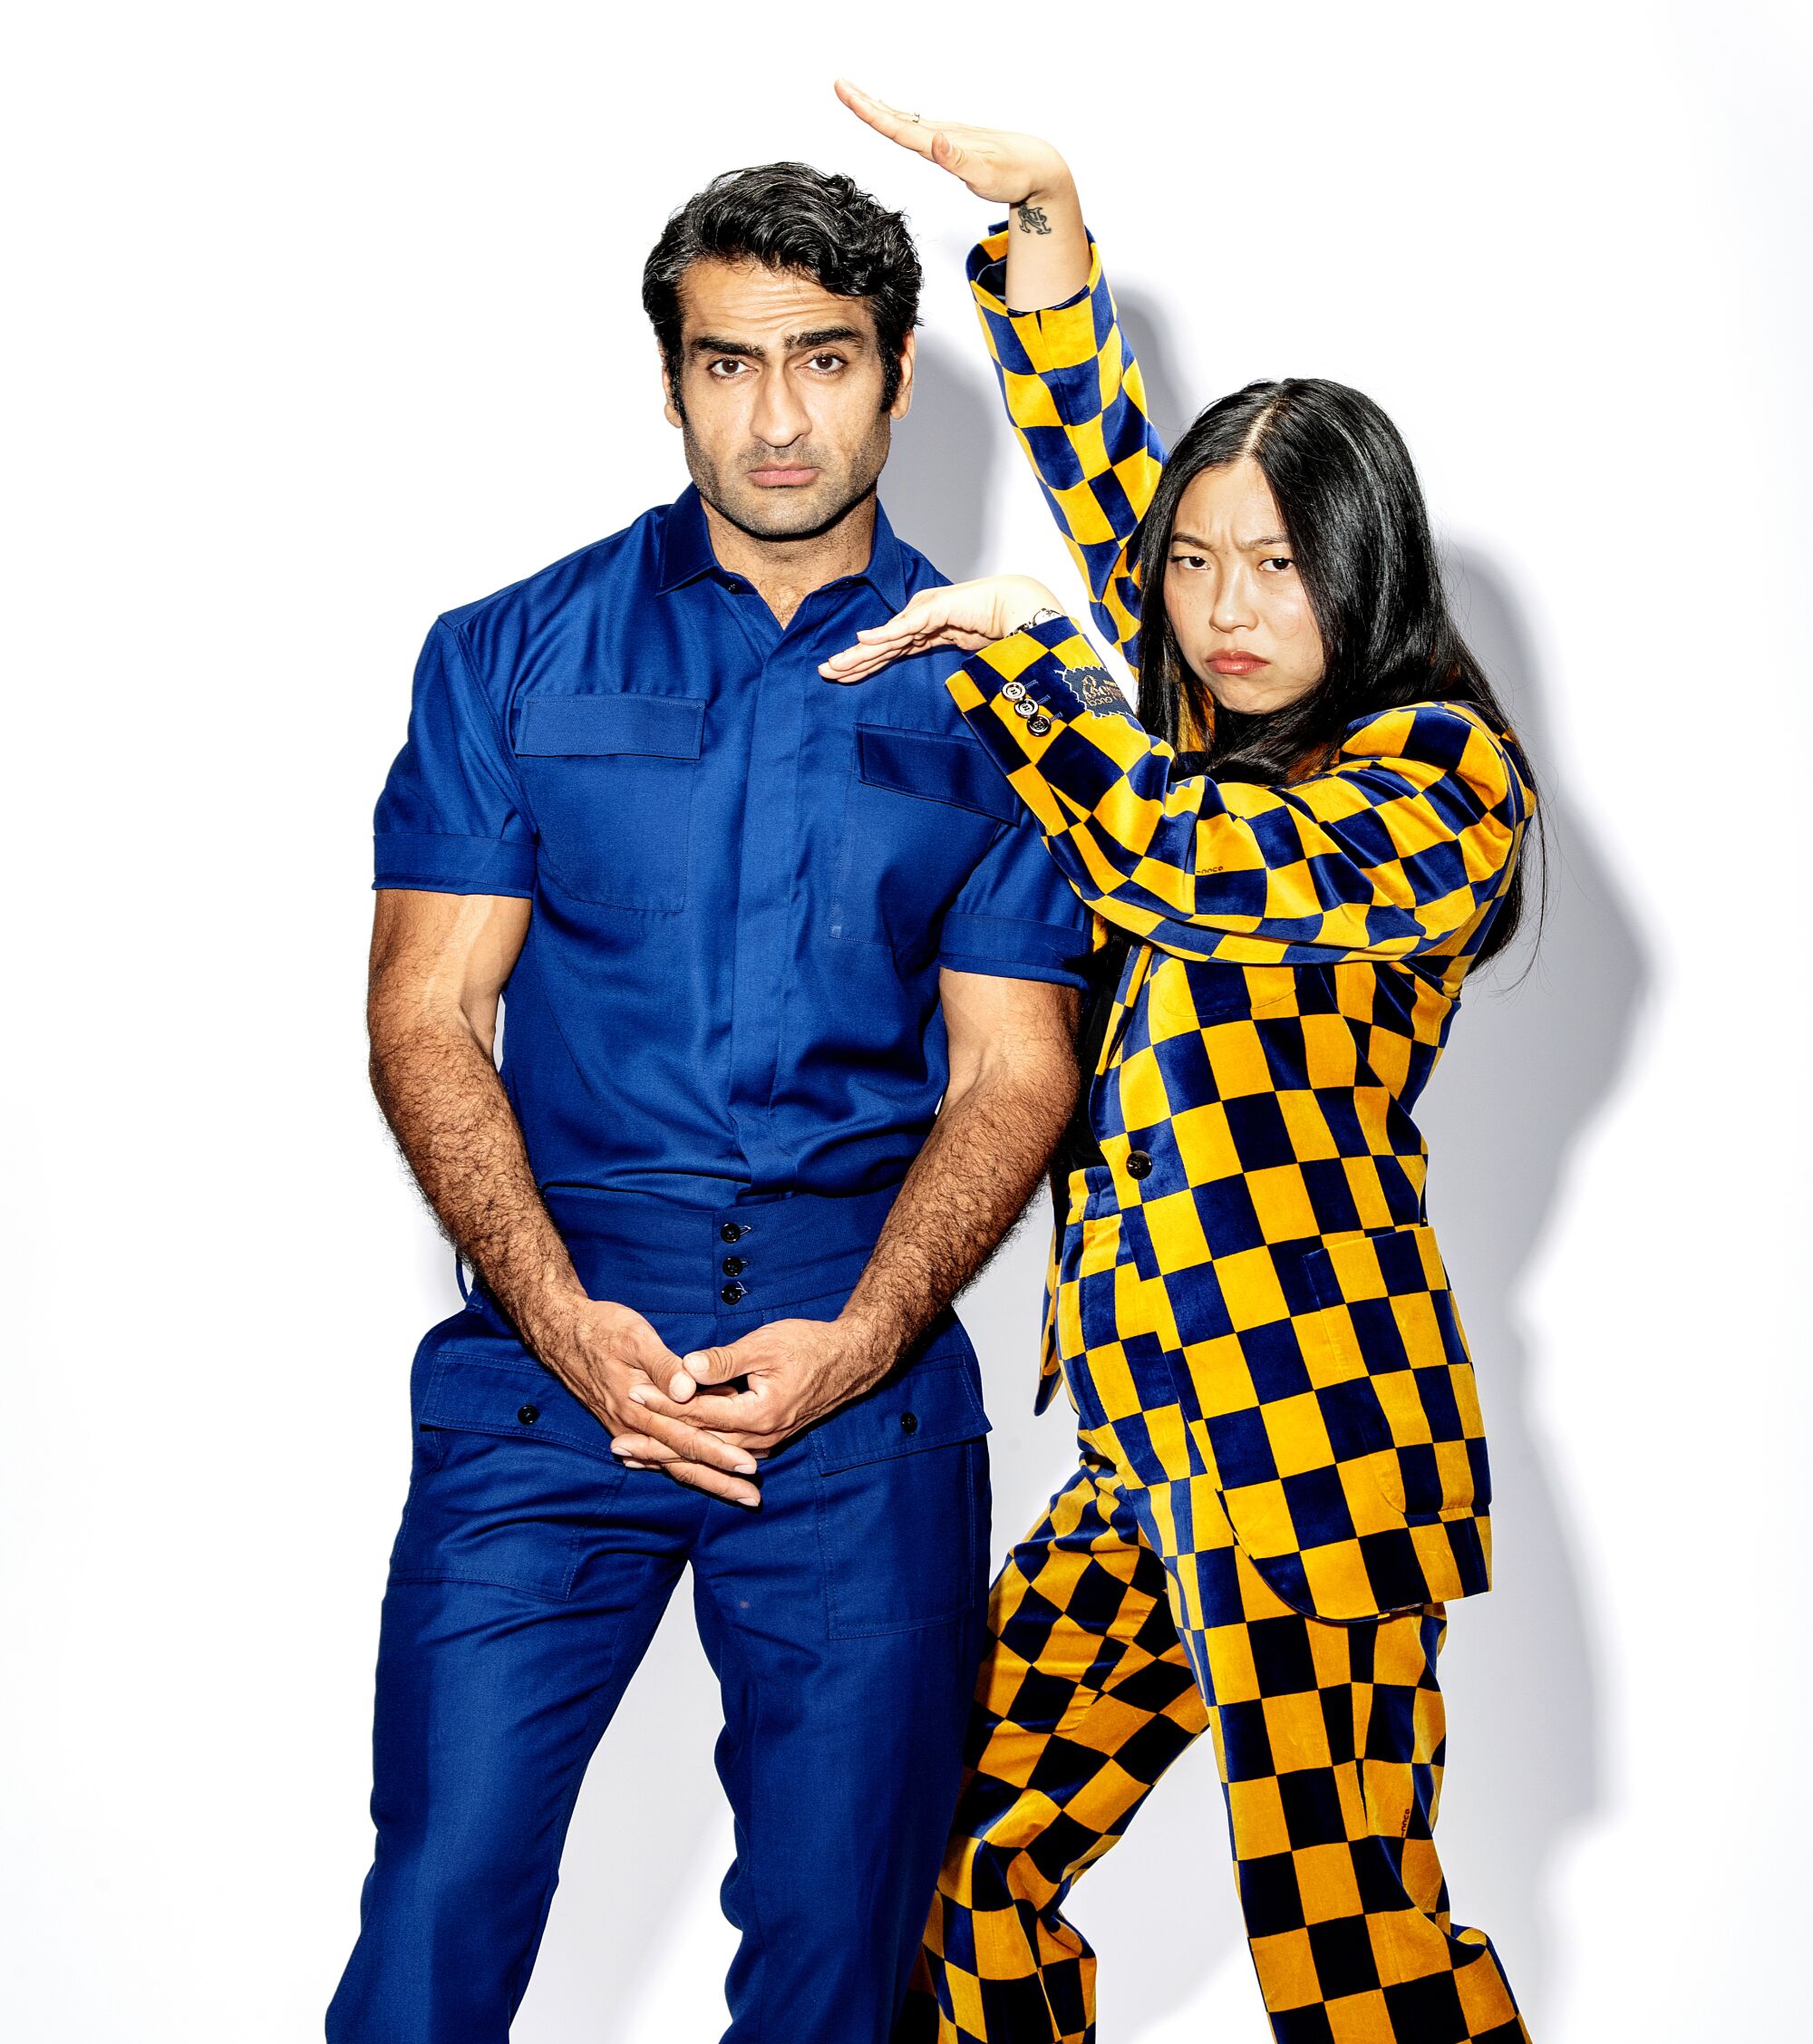 Aug. 16: Kumail Nanjiani in a blue shirt and pants next to Awkwafina in a blue and yellow checkered suit